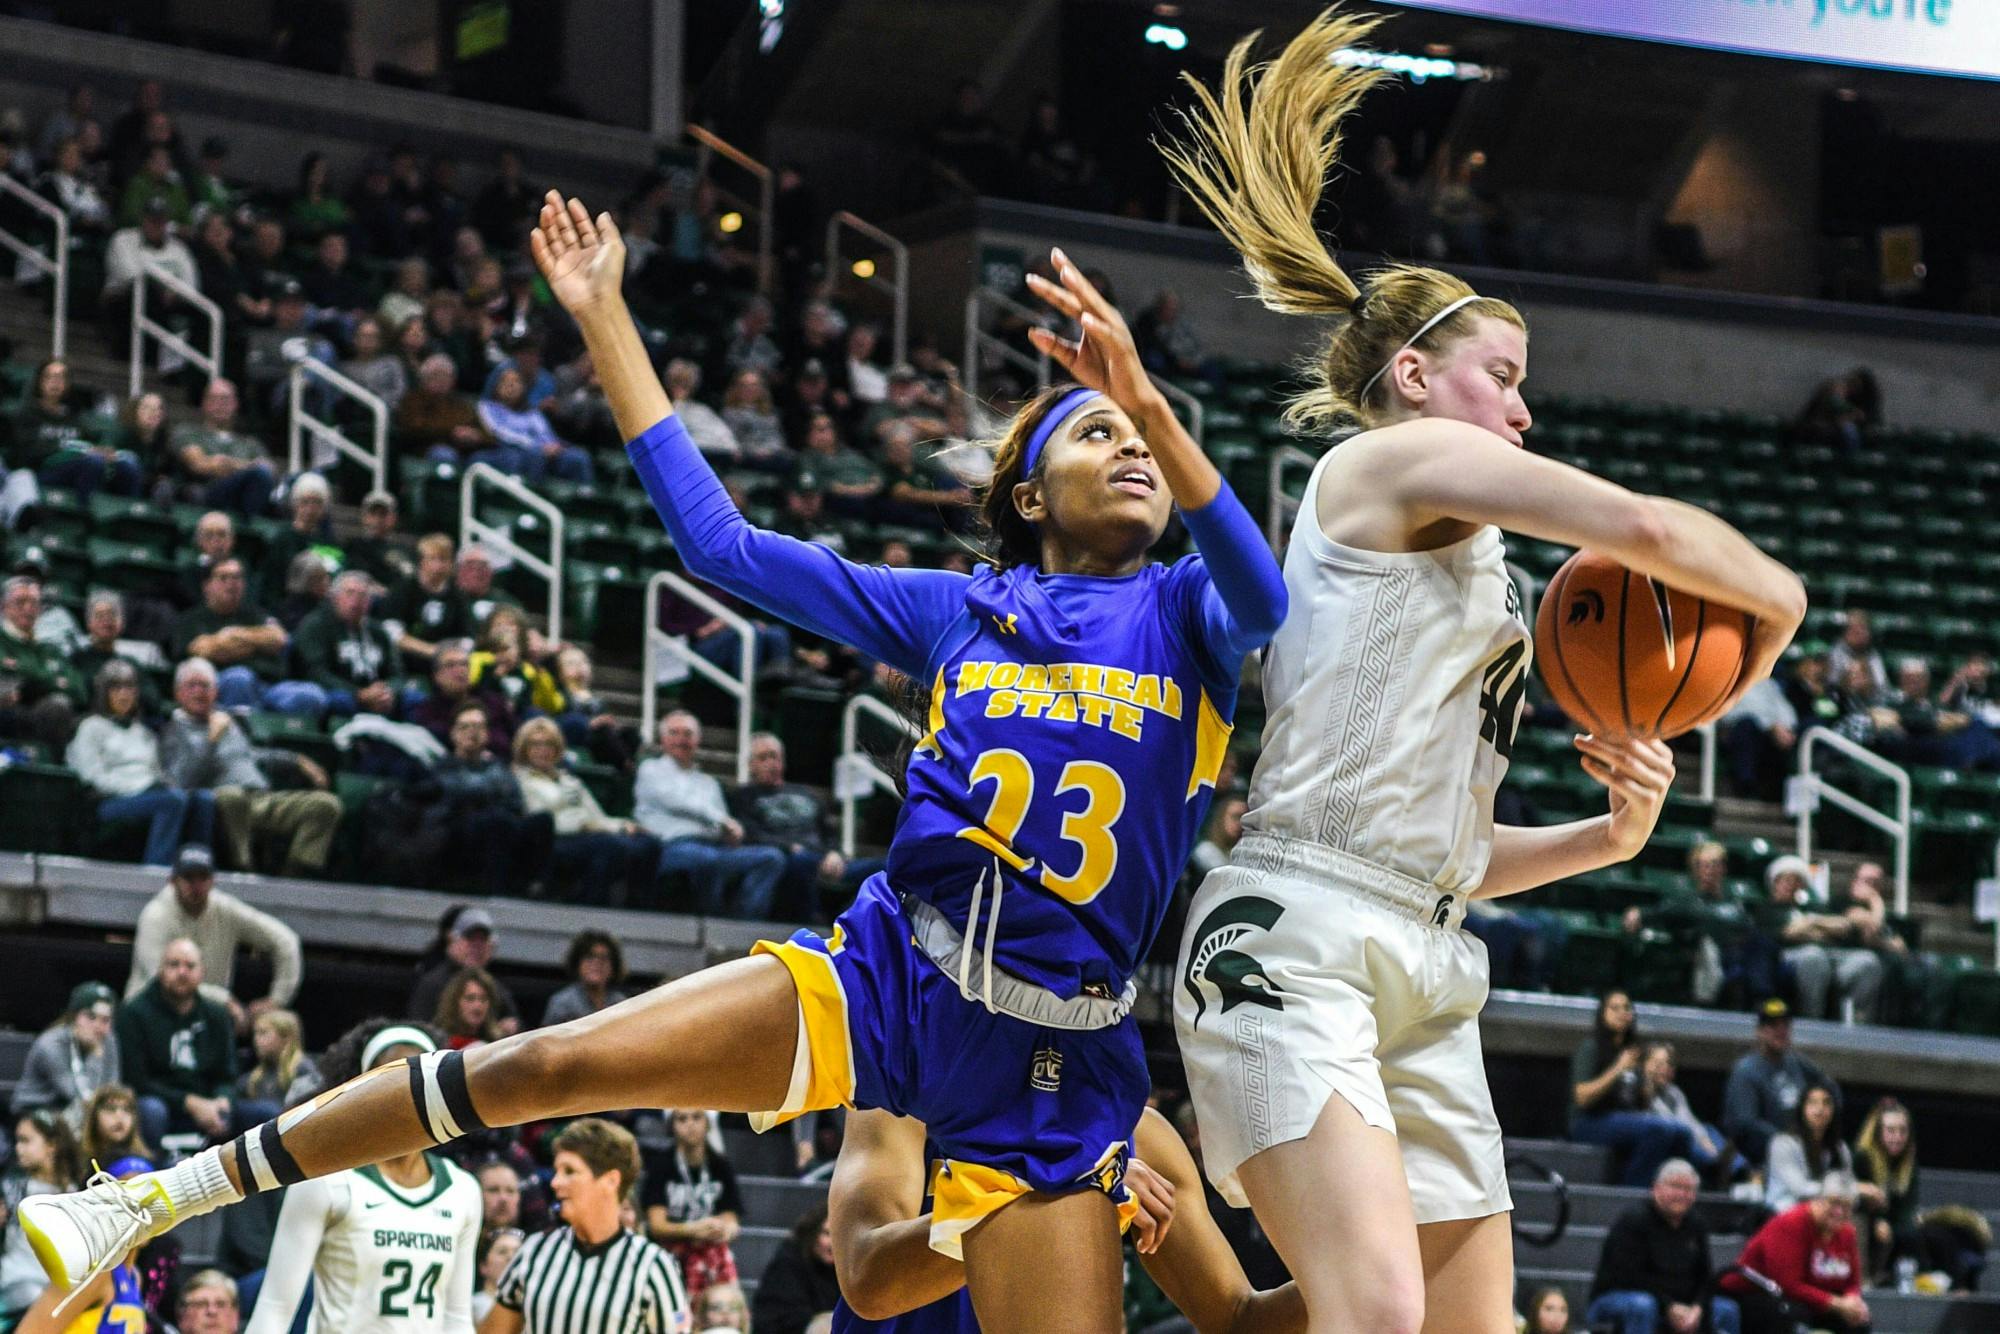 <p>Freshman guard Julia Ayrault (40) grabs the ball during the game against Morehead State at Breslin Center on Dec. 15, 2019. The Spartans defeated the Eagles, 93-48.</p>